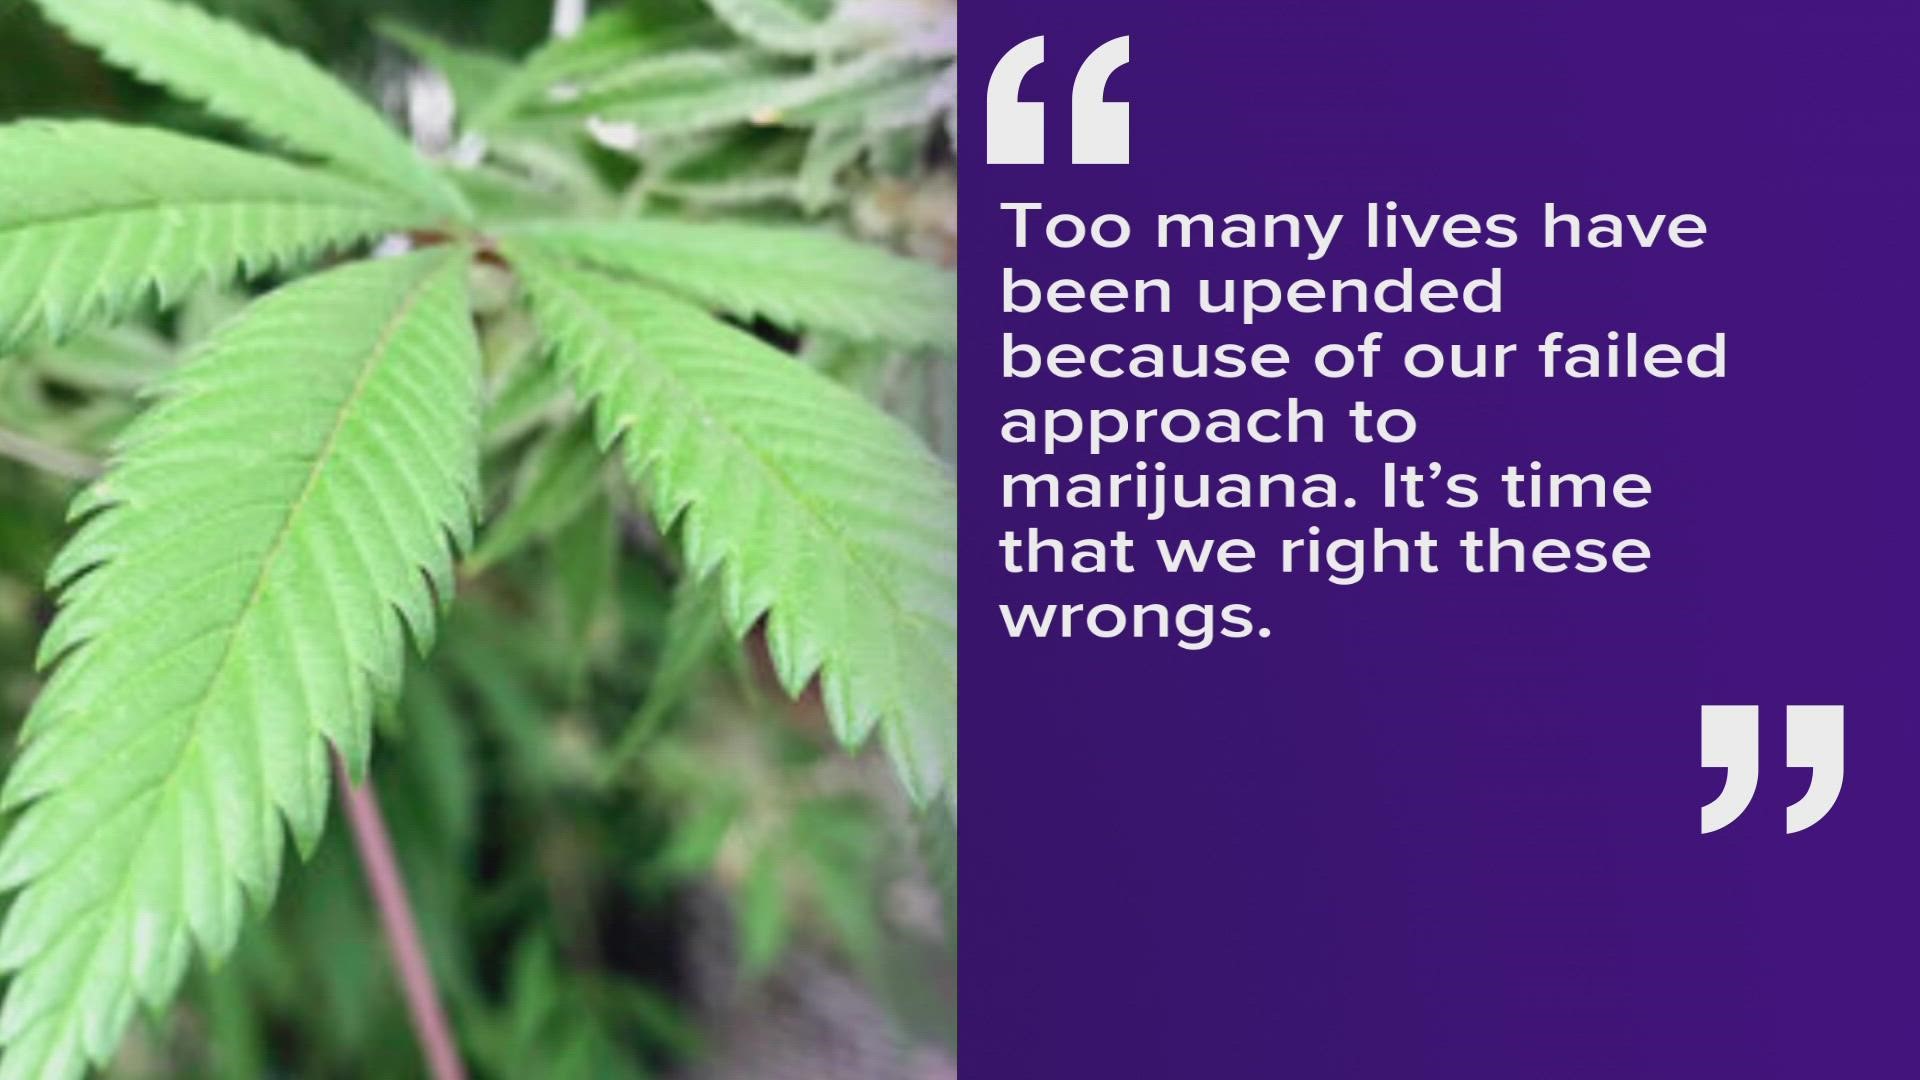 The president said "too many lives have been upended because of our failed approach to marijuana. It's time we right these wrongs."